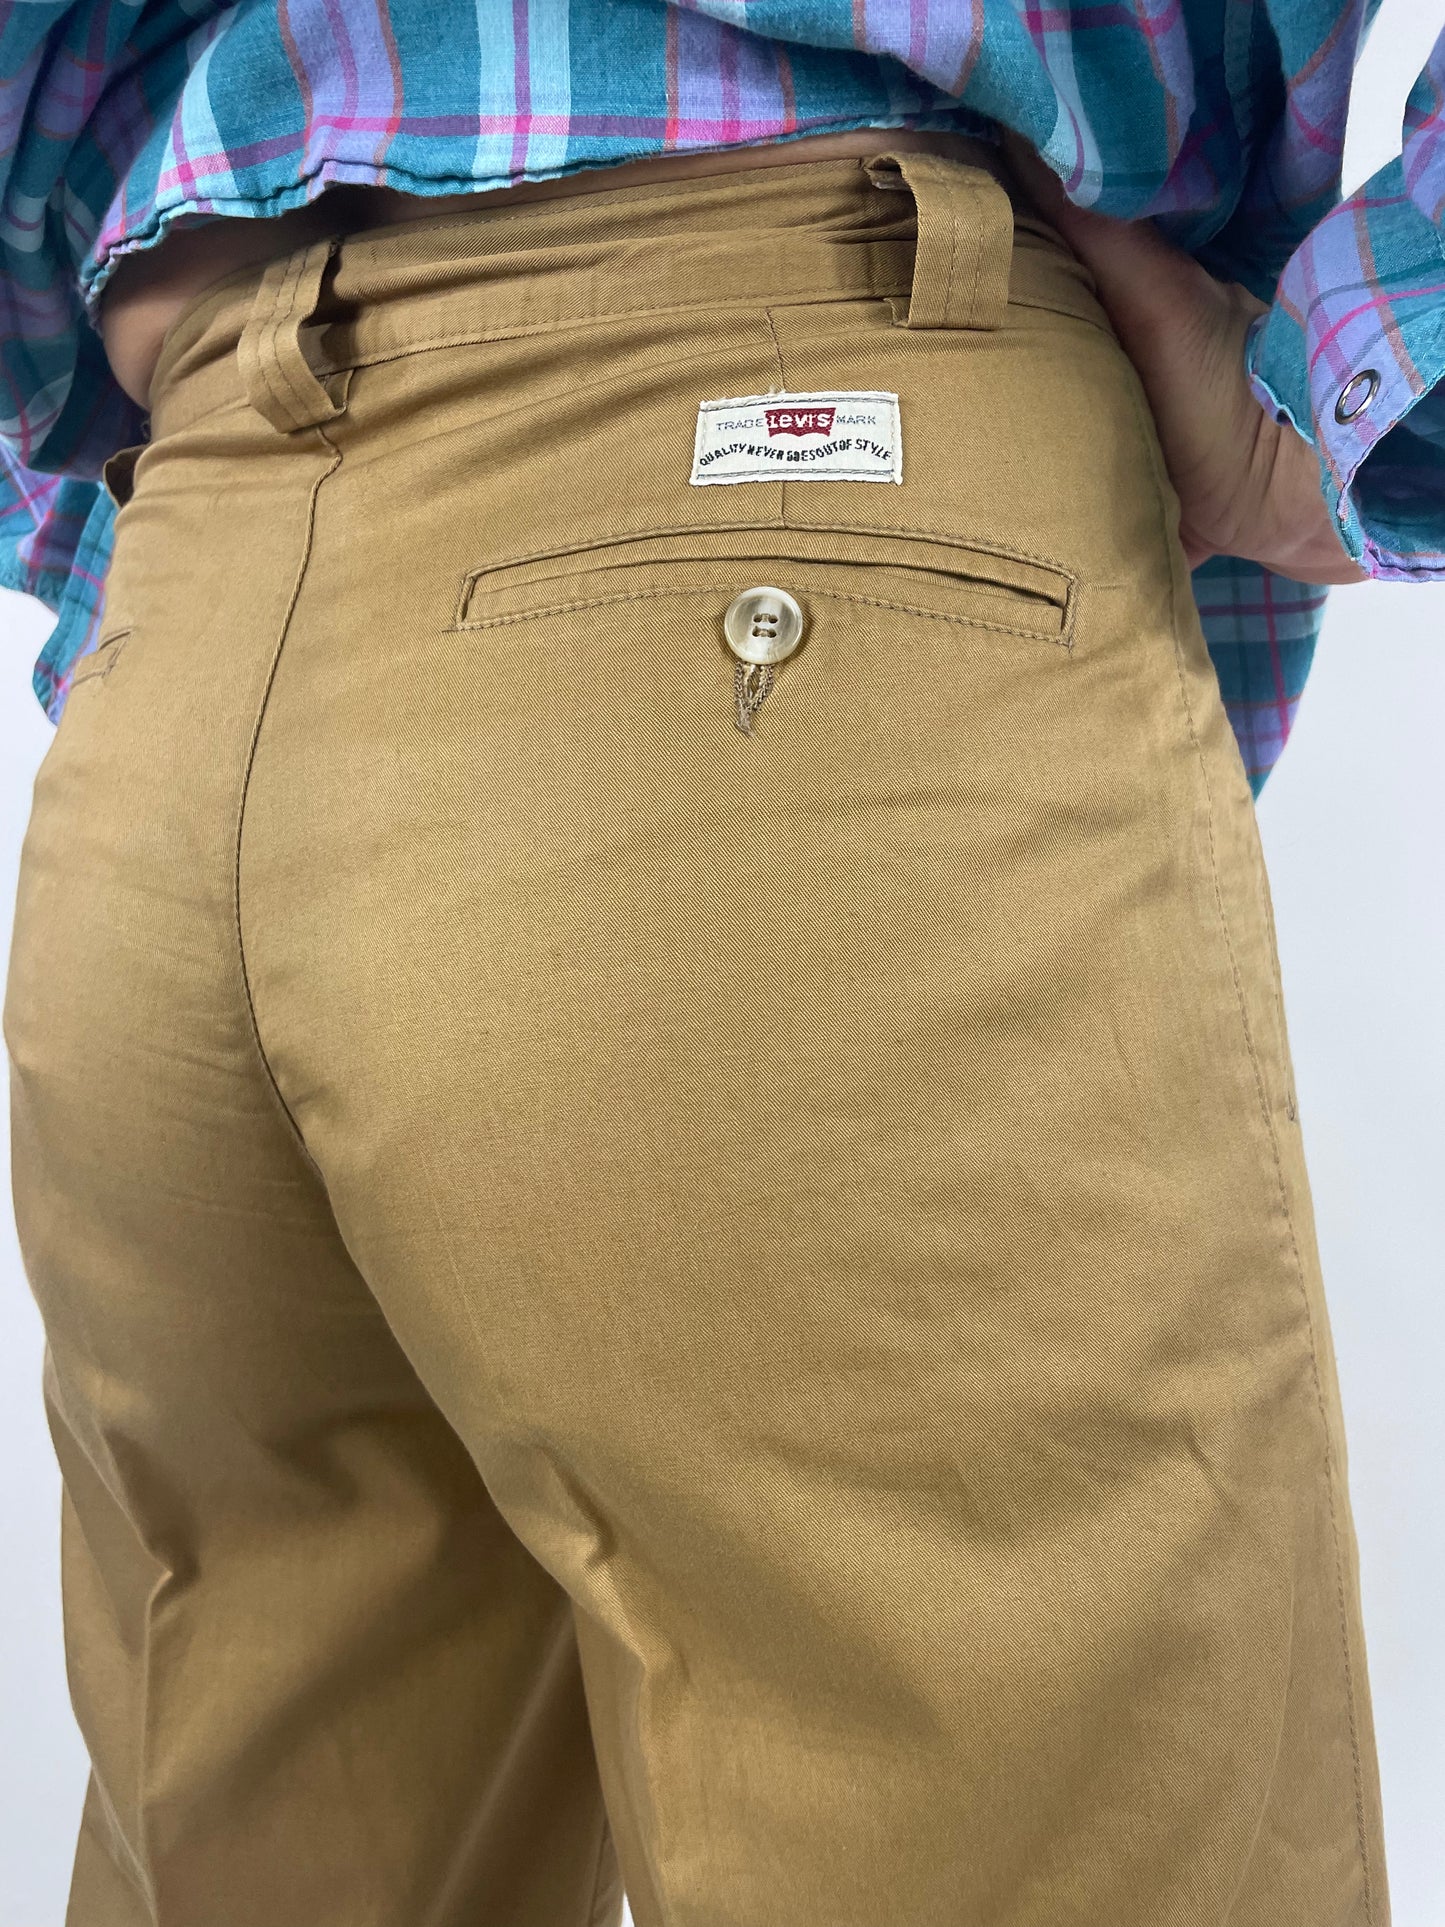 Levi's 1980s trousers